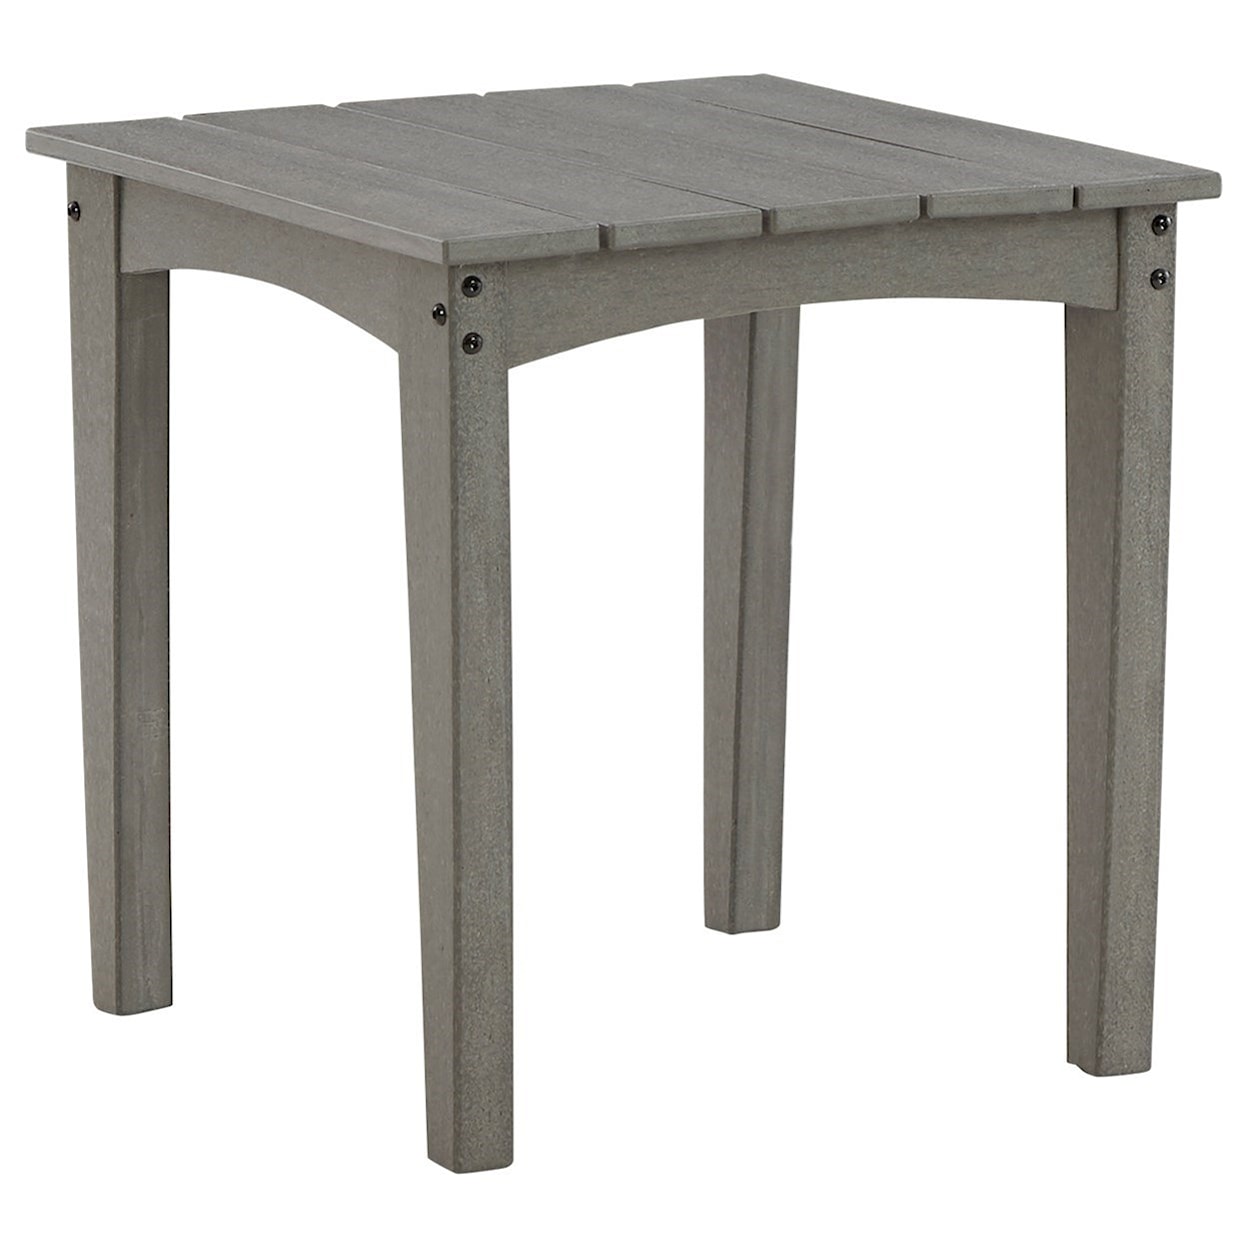 Benchcraft Visola Square End Table